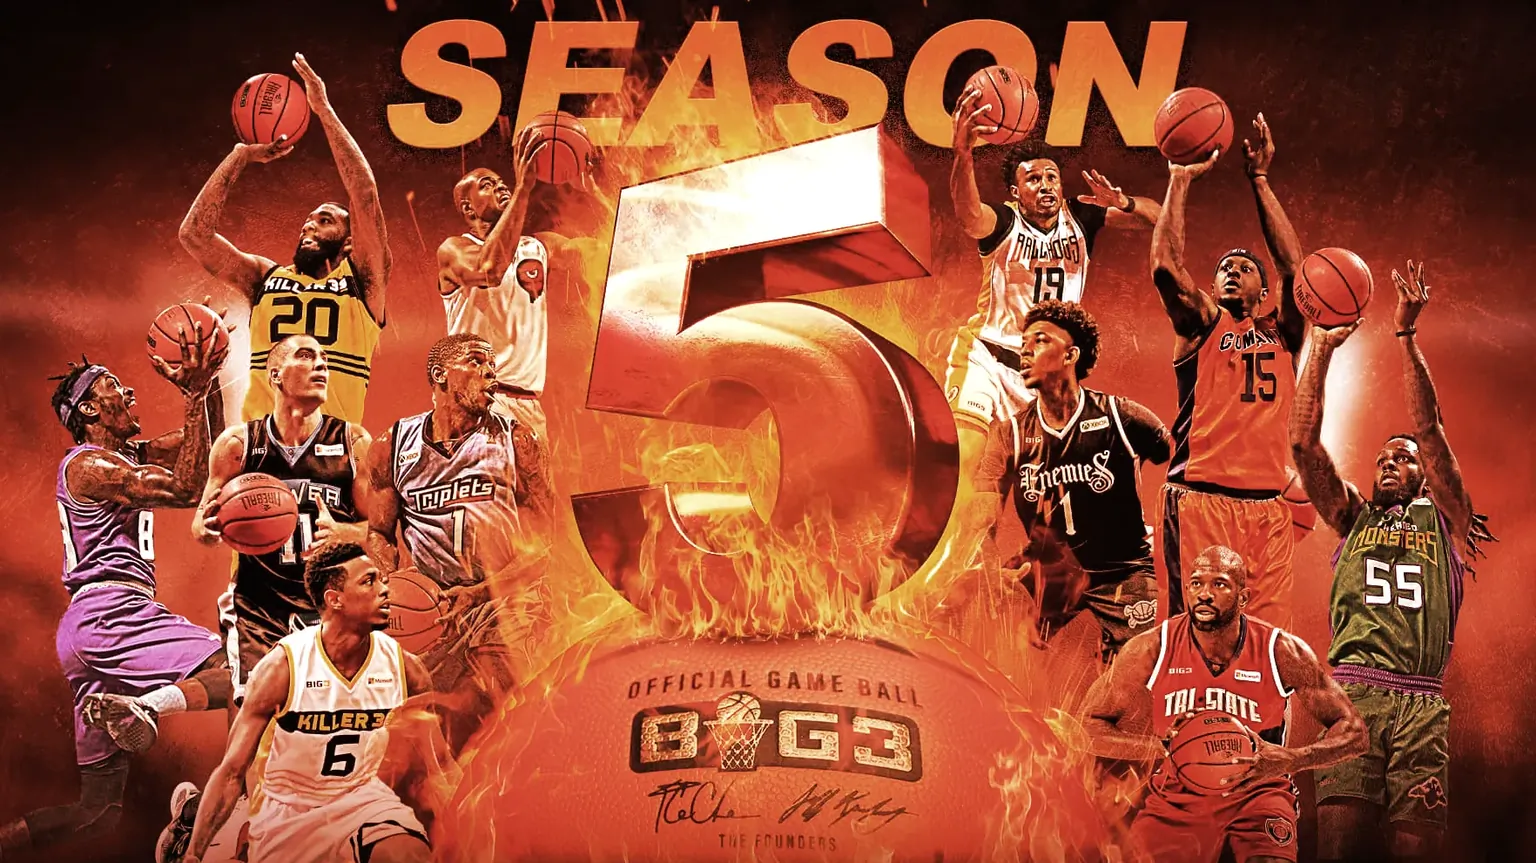 Ice Cube's BIG3 league is offering team ownership stakes via NFTs. Image: BIG3